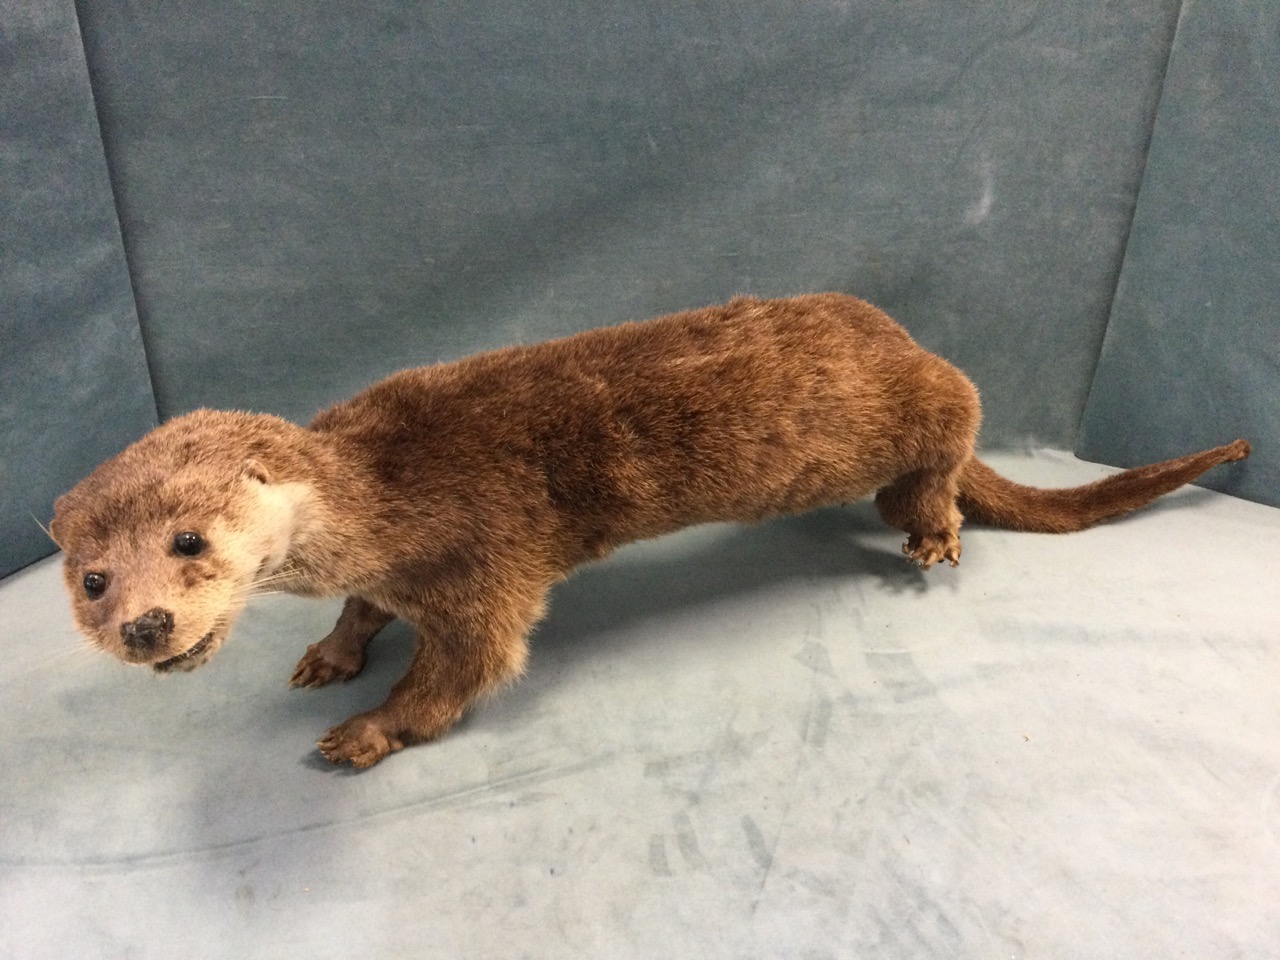 A taxidermied otter, the animal with glass eyes and extended tail. (37in)